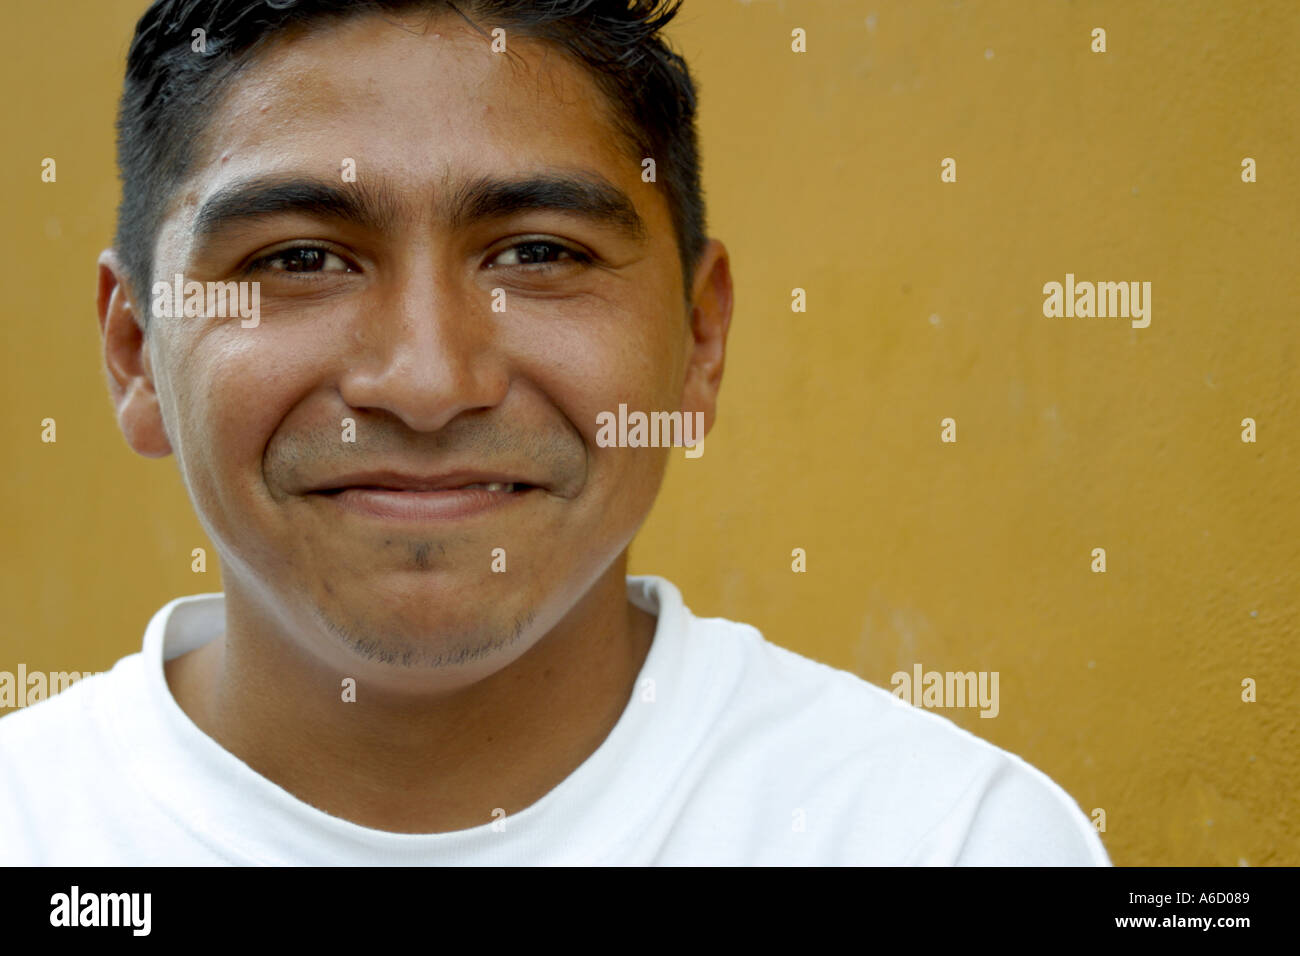 Mexican Boy Smiling Stock Photo